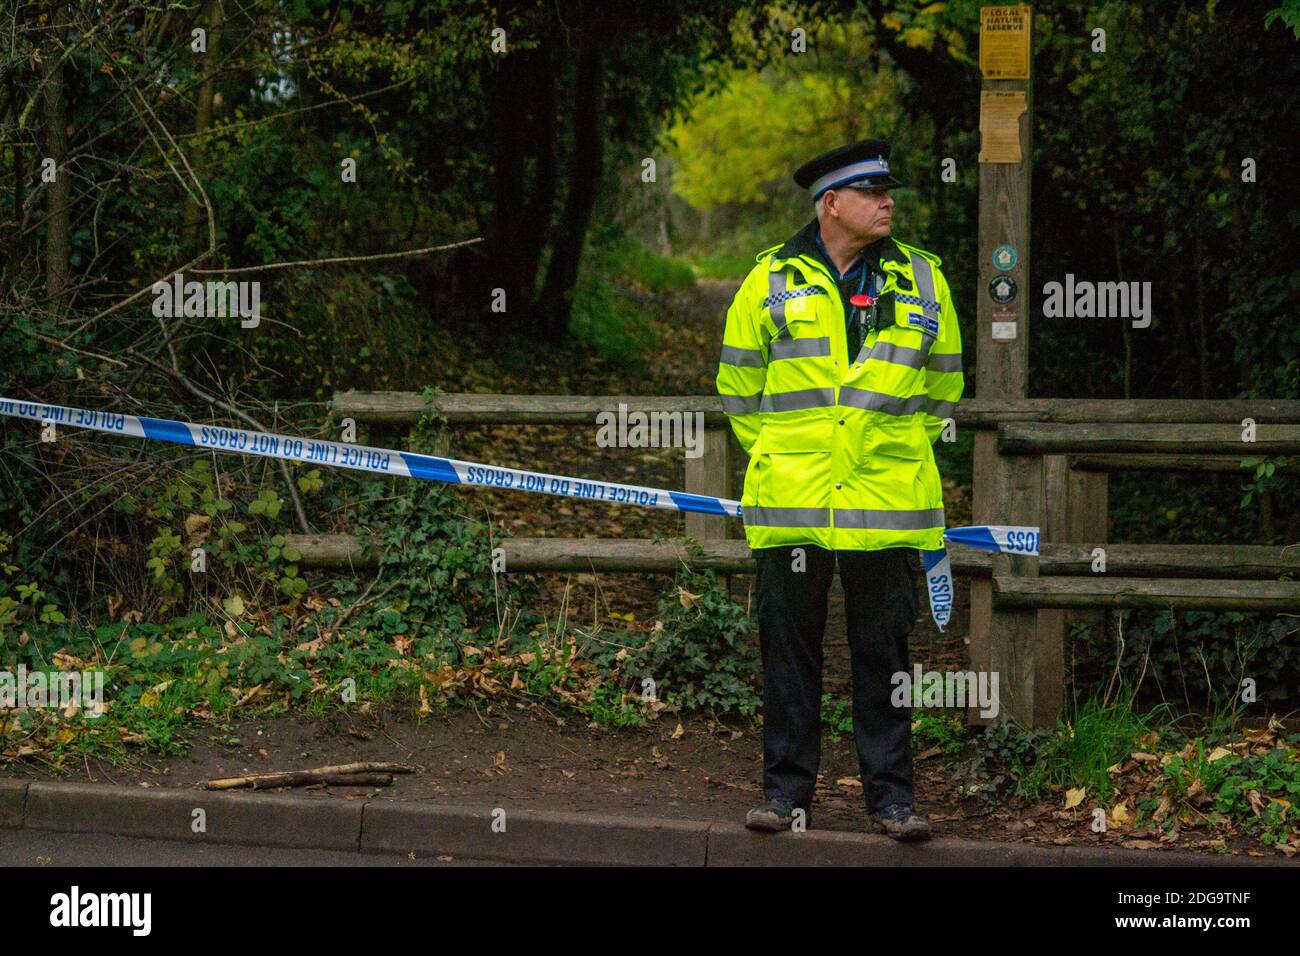 Police cordon on Willes Road, Leamington, where a body was discovered on Newbold Comyn and was further linked to a murder of two others in Coventry by suspect Anthony Russell, October 2020 Stock Photo